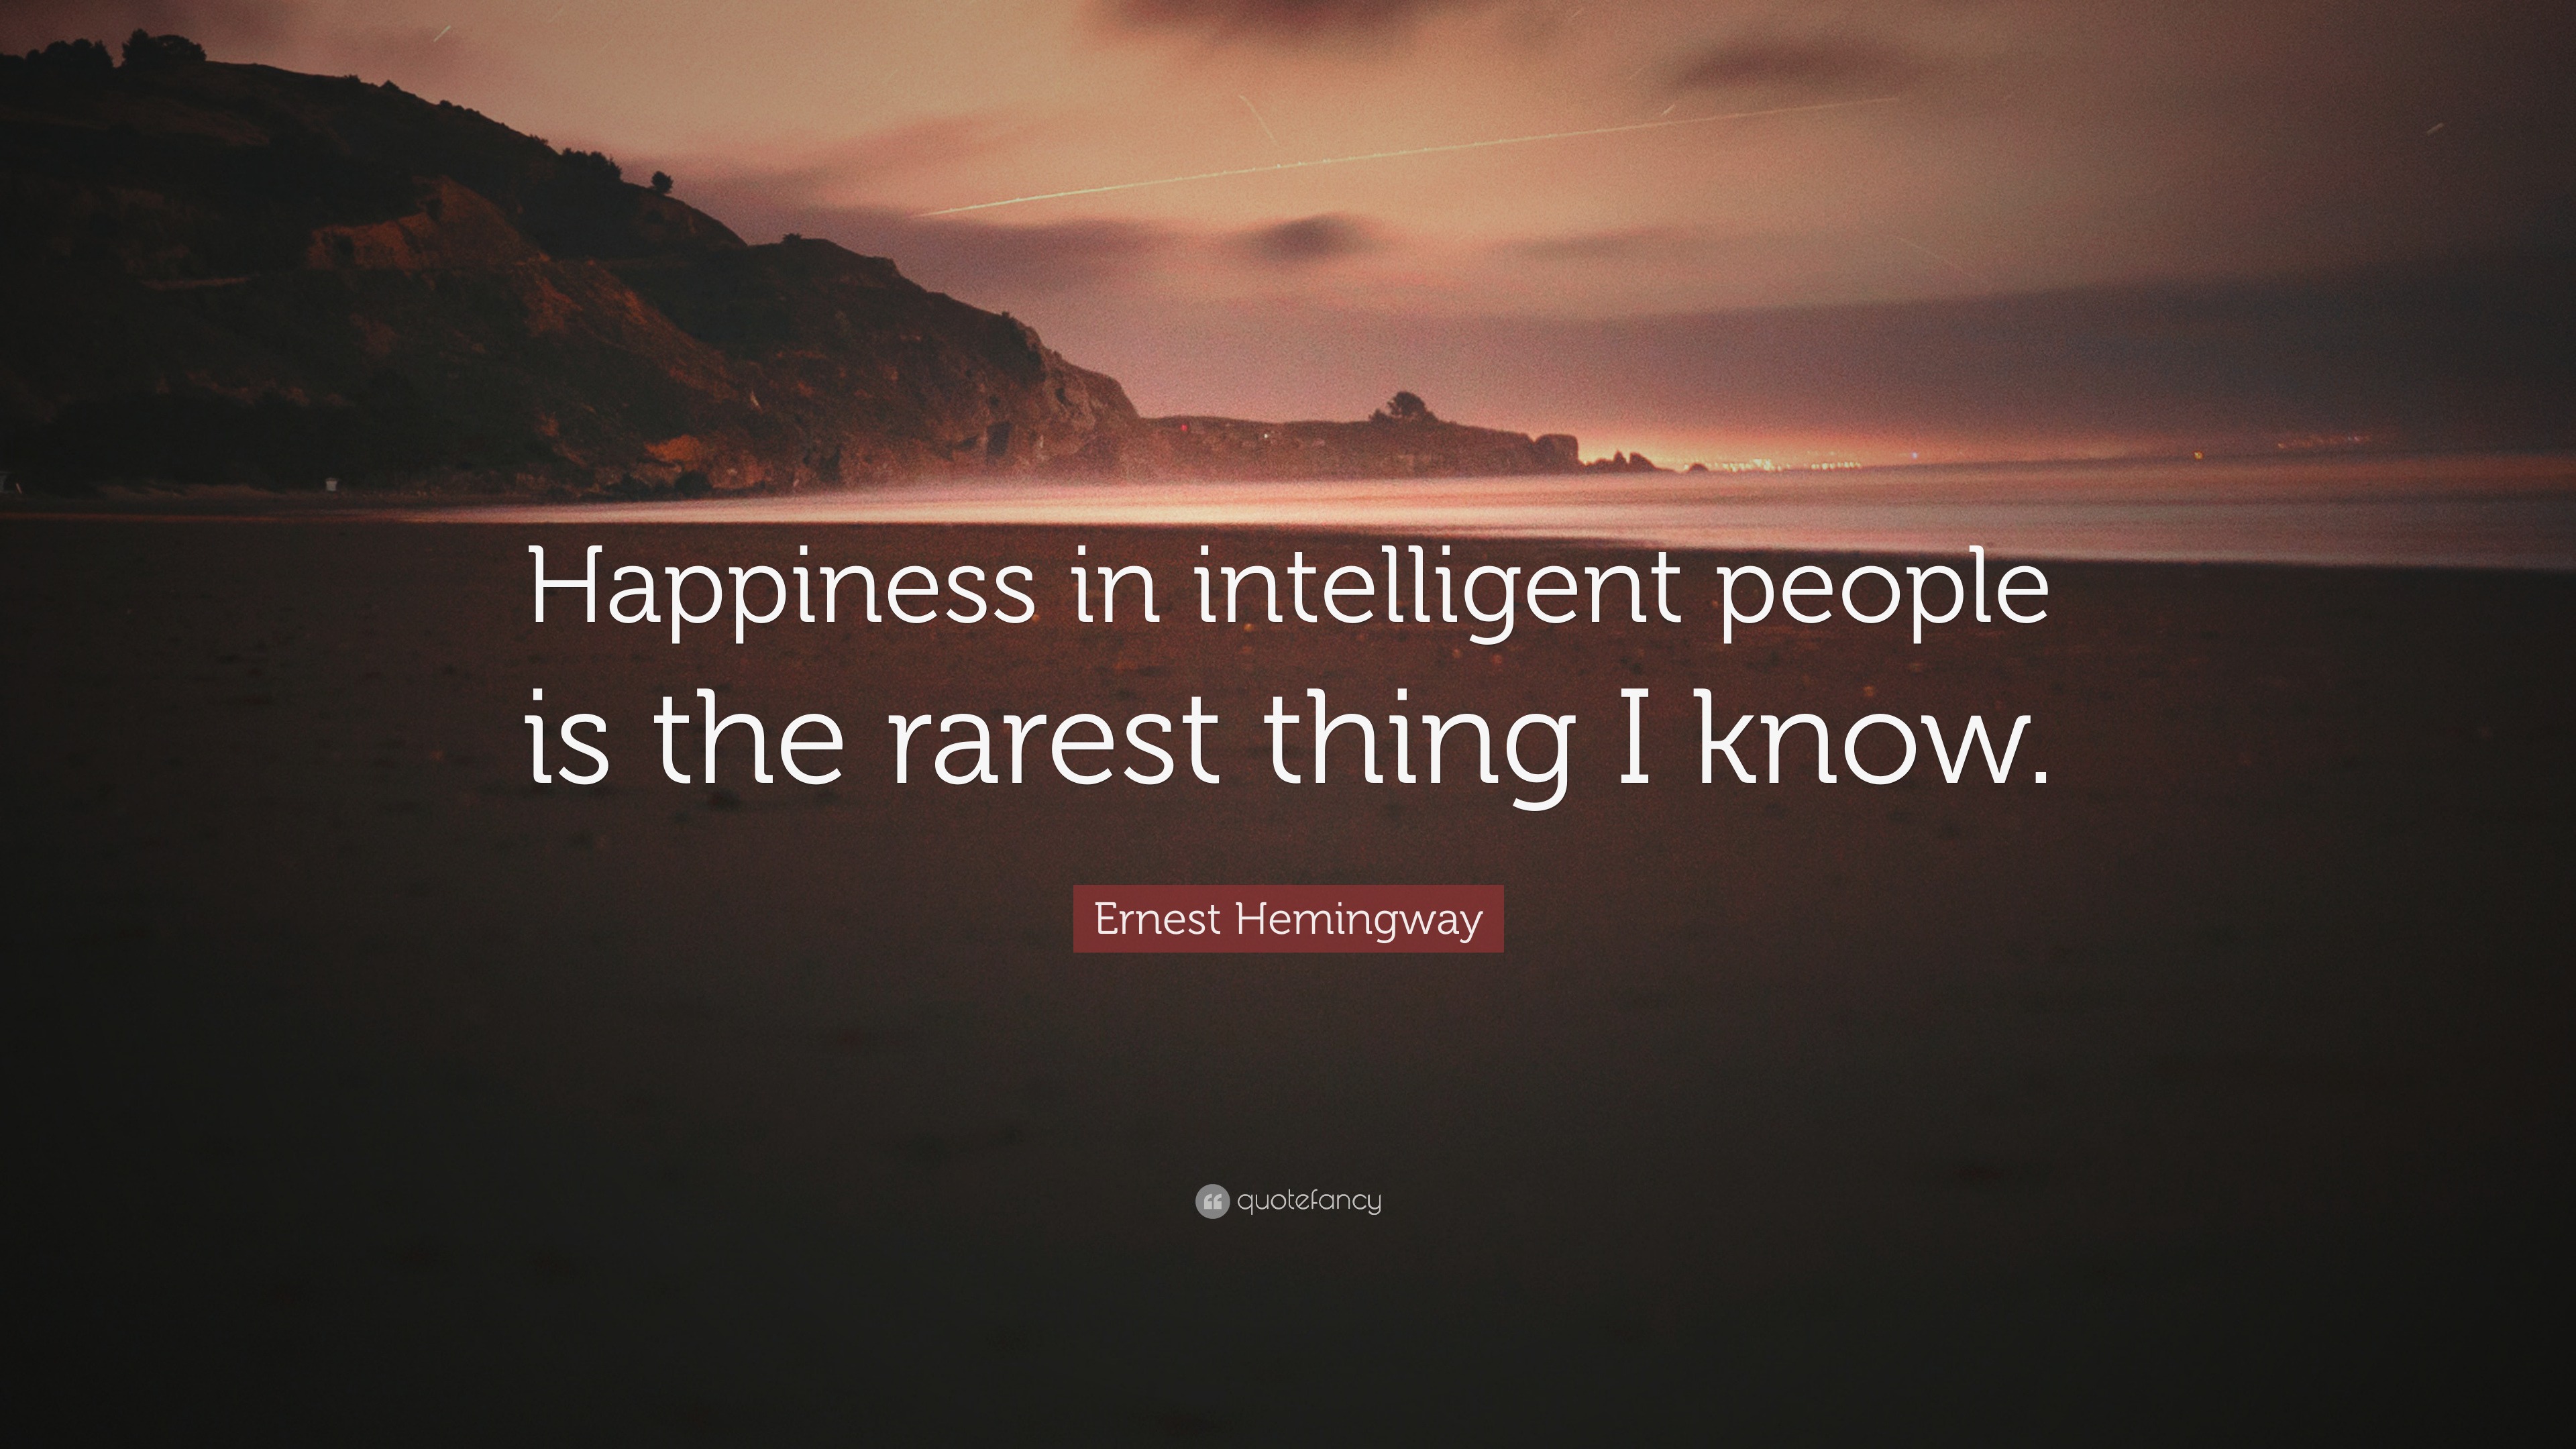 Pursuit as Happiness,” by Ernest Hemingway